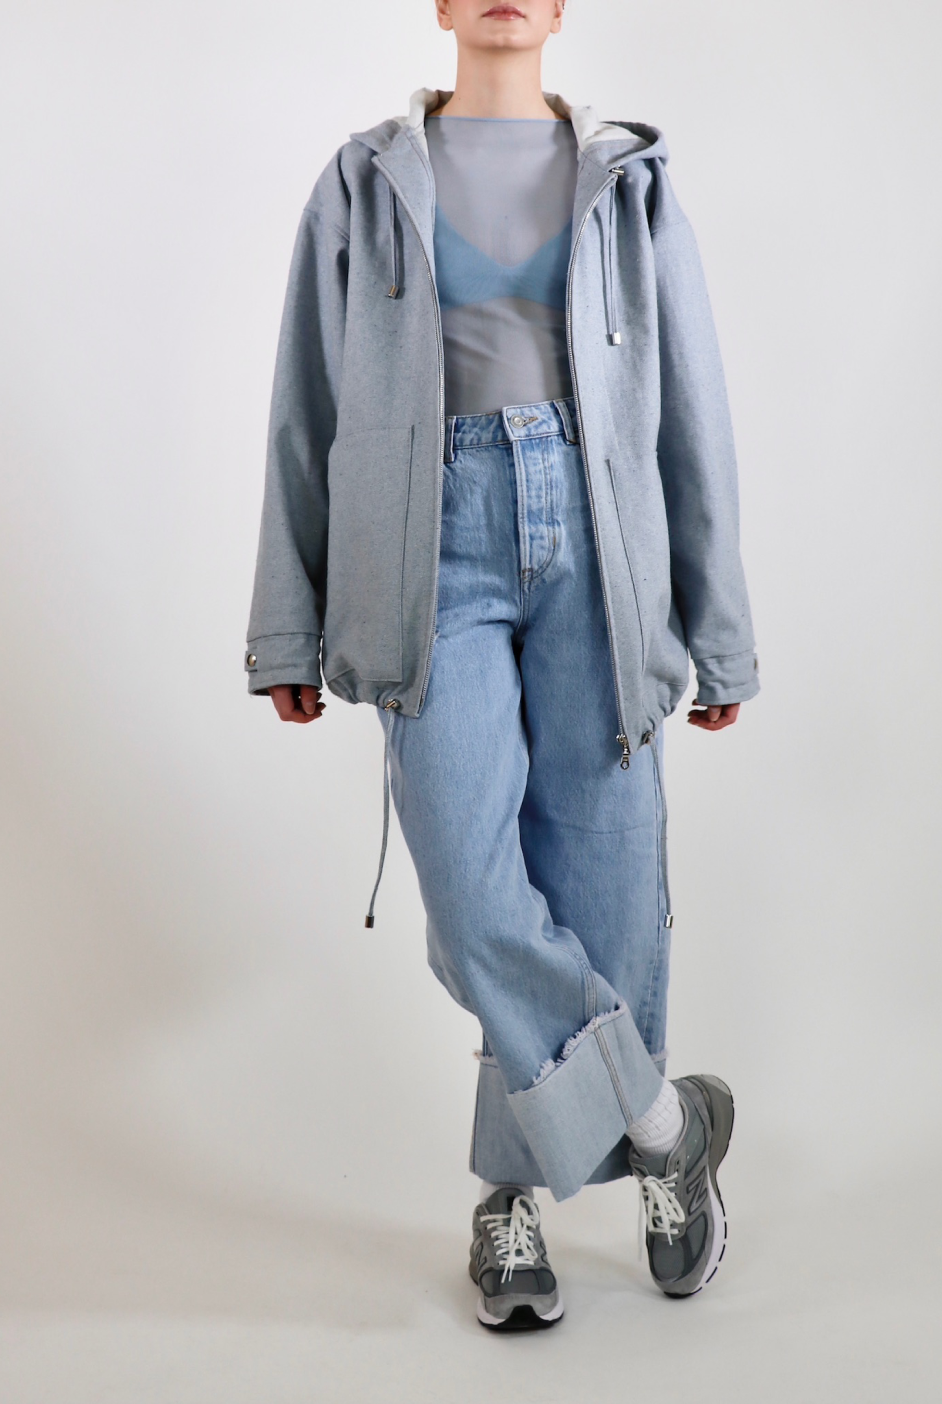 FURB Upcycled - Lexington Upcycled Denim - Light blue. Made from 100% sustainable eco-cotton. 